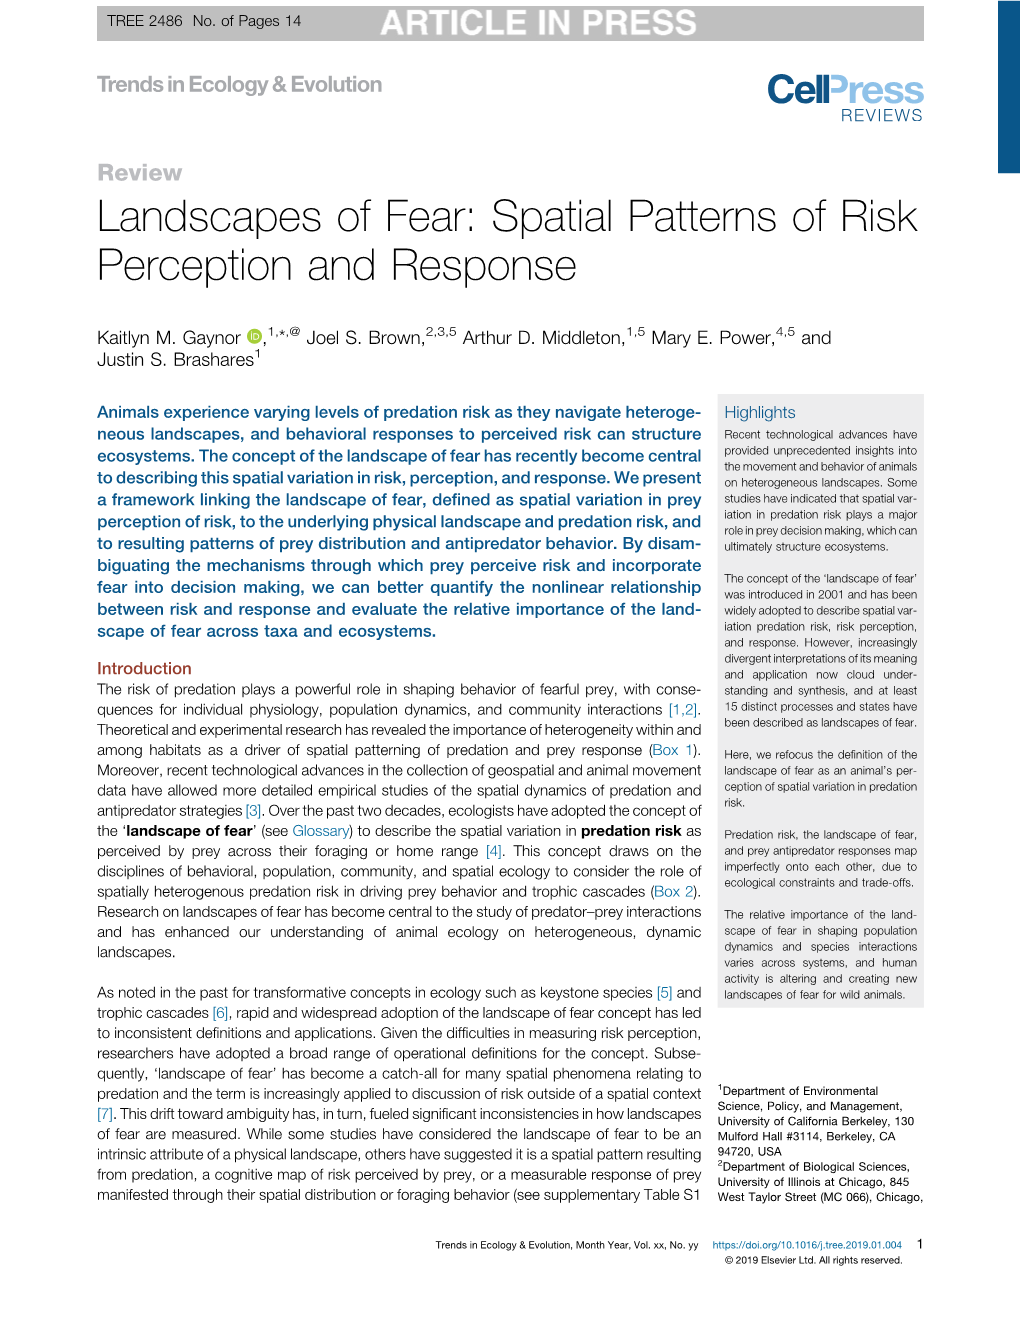 Landscapes of Fear: Spatial Patterns of Risk